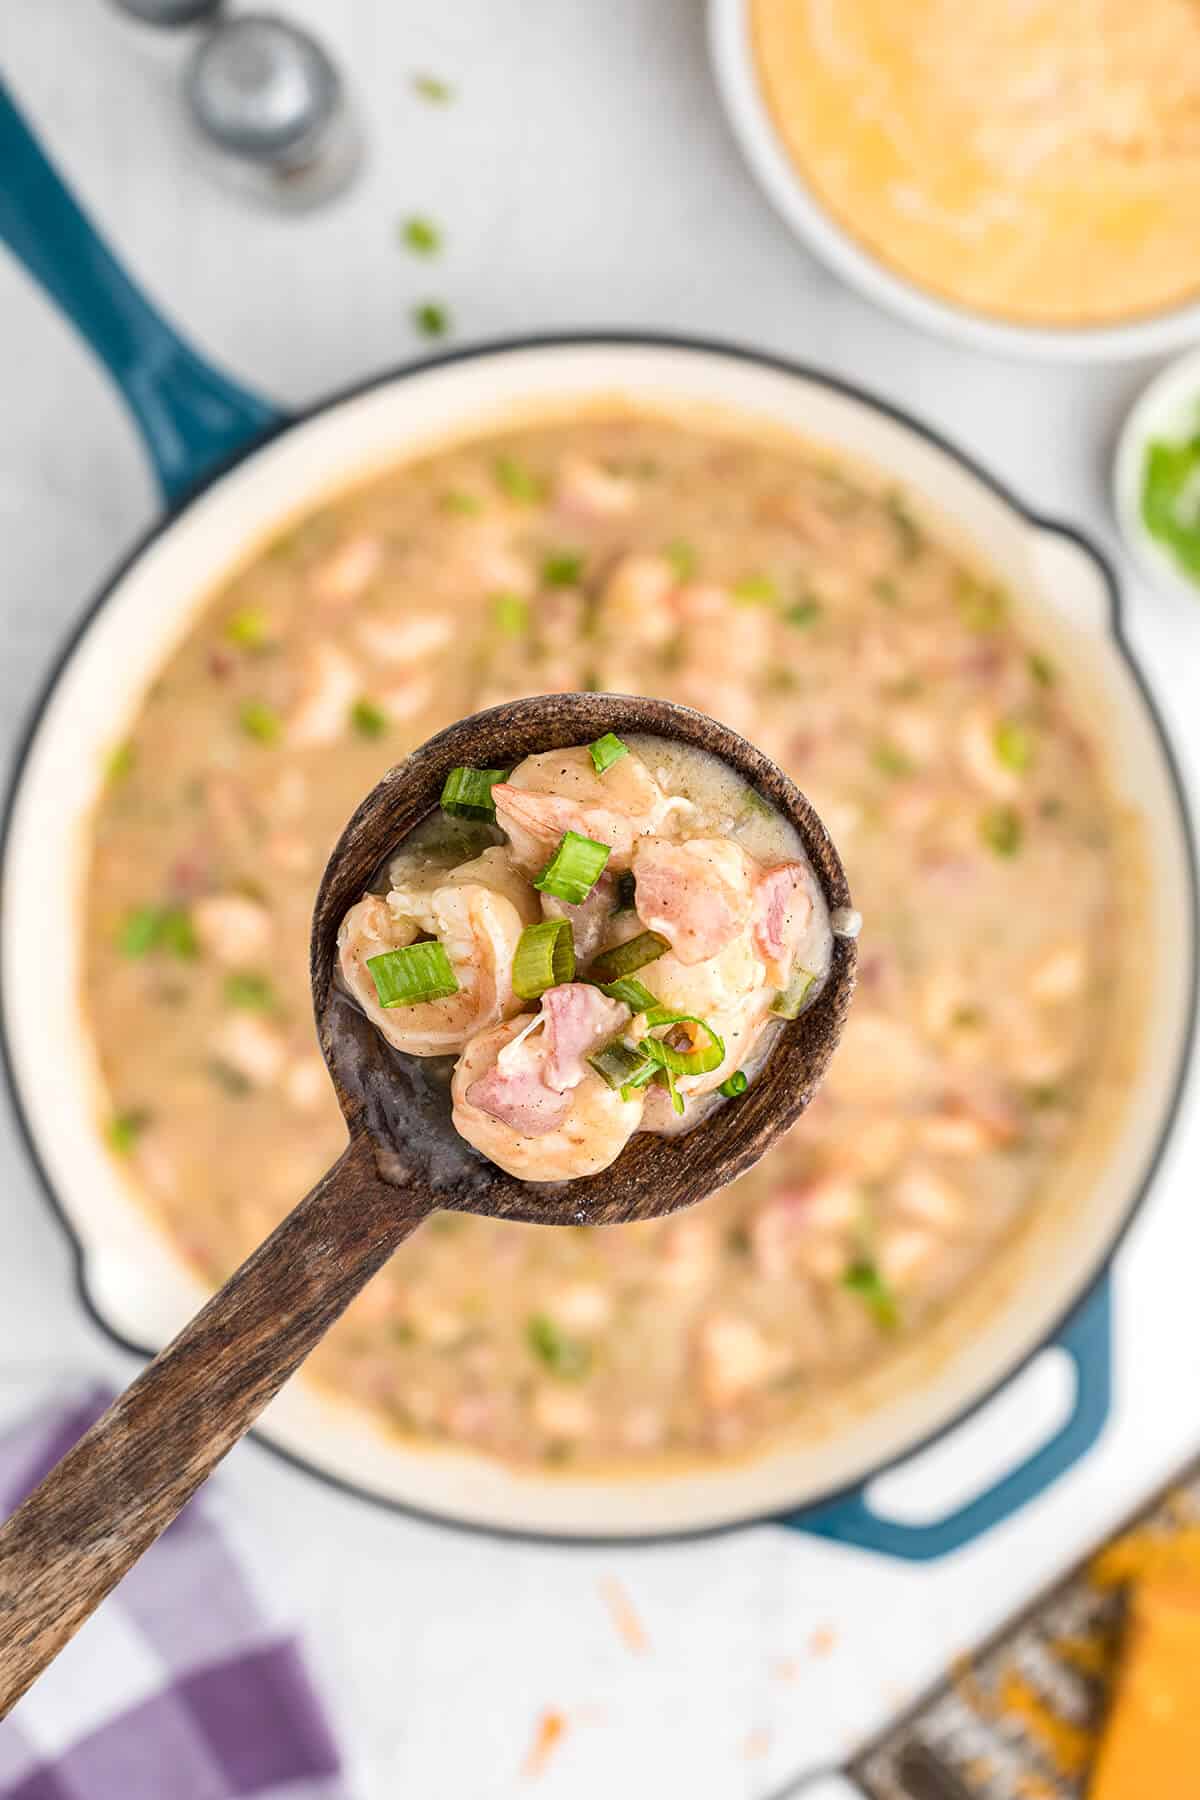 A wooden spoon holding a bite of shrimp and grits.